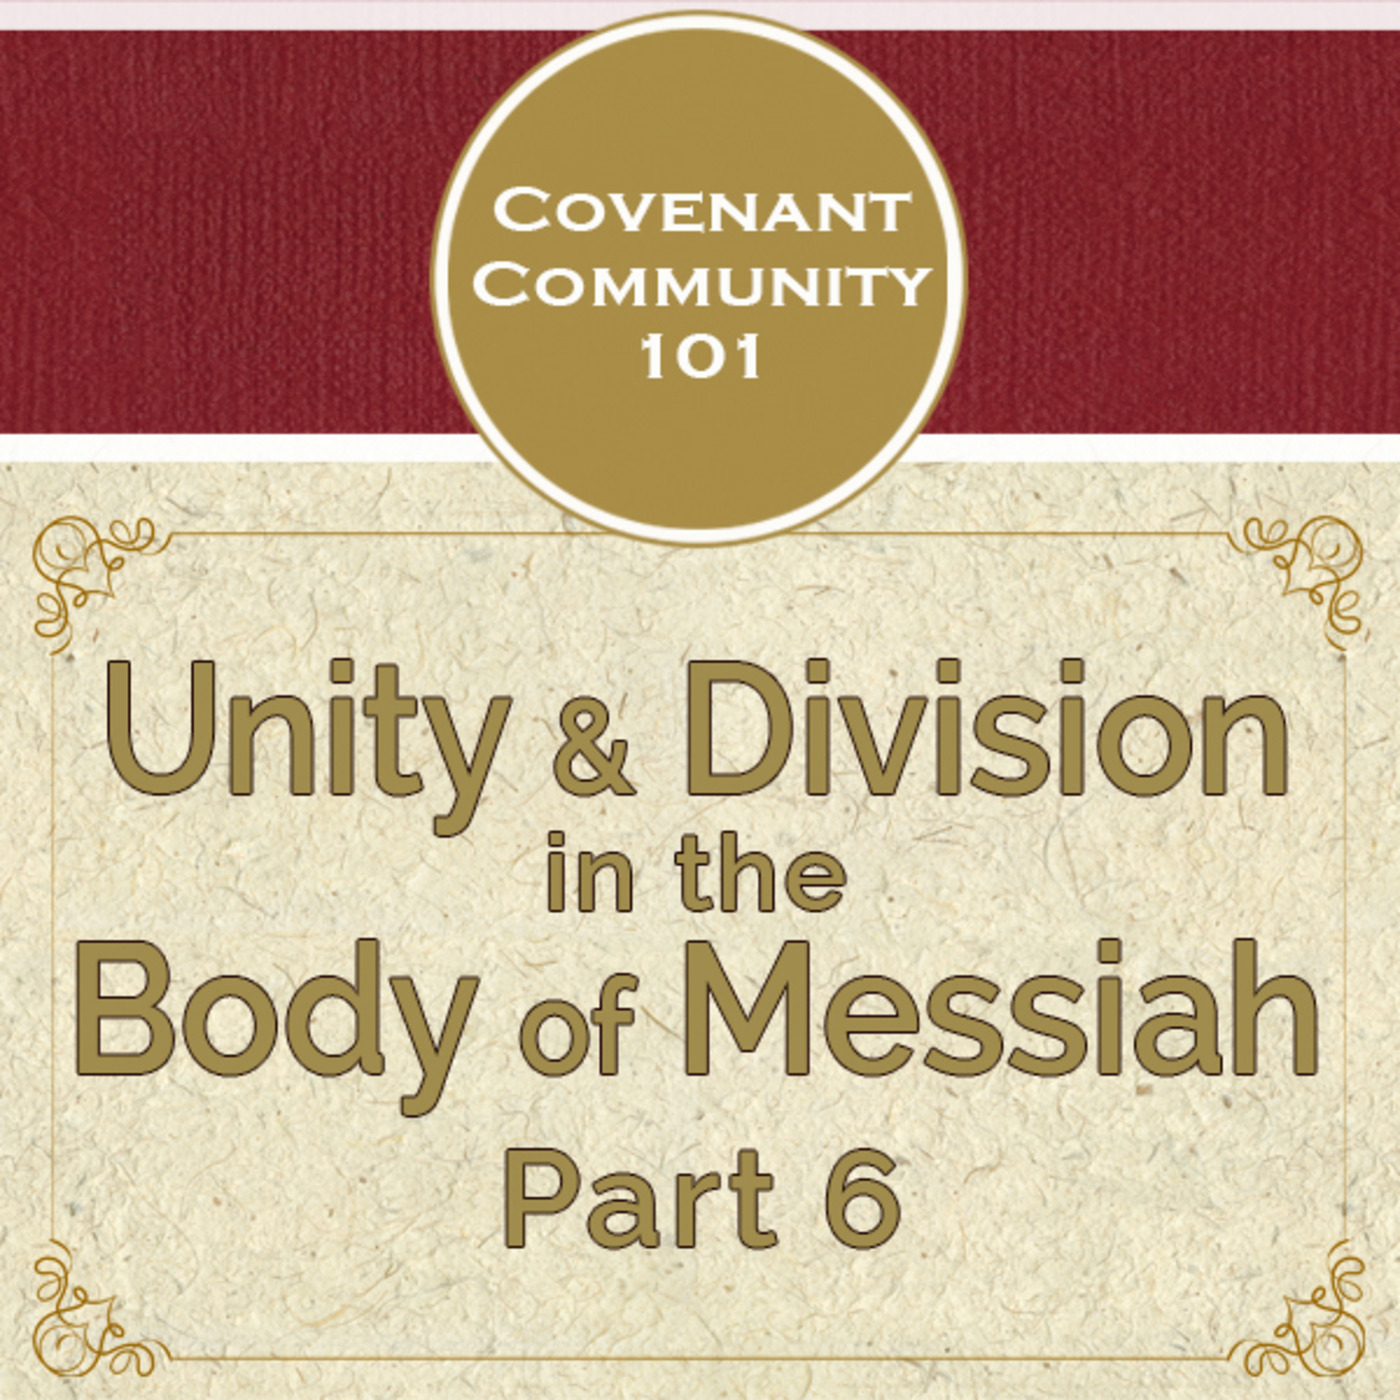 Covenant Community 101: Unity & Division in the Body of Messiah - Part 6